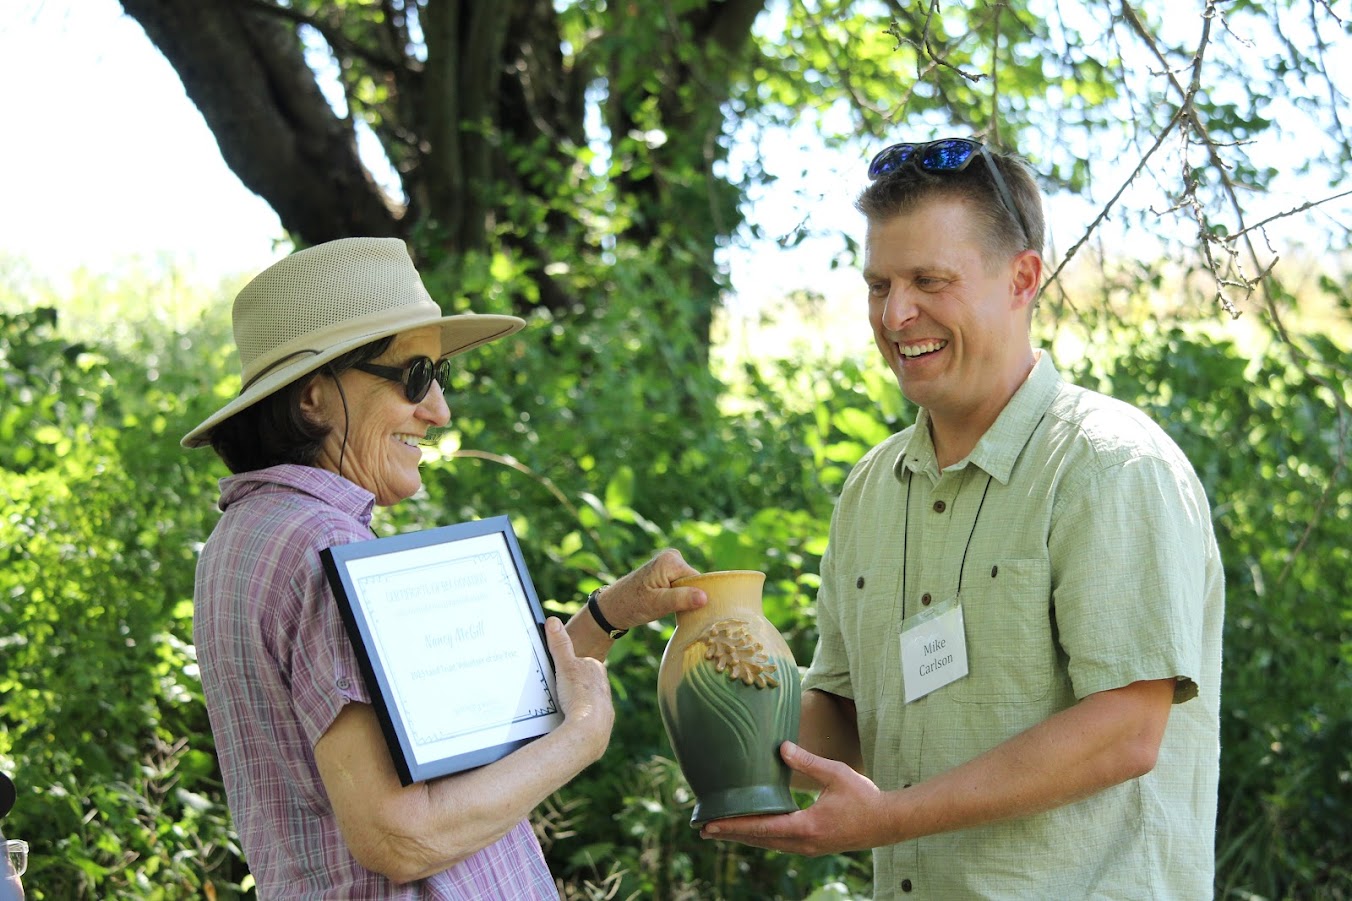 A woman receiving a framed certificate and ceramic vase form a man in an outdoor setting.